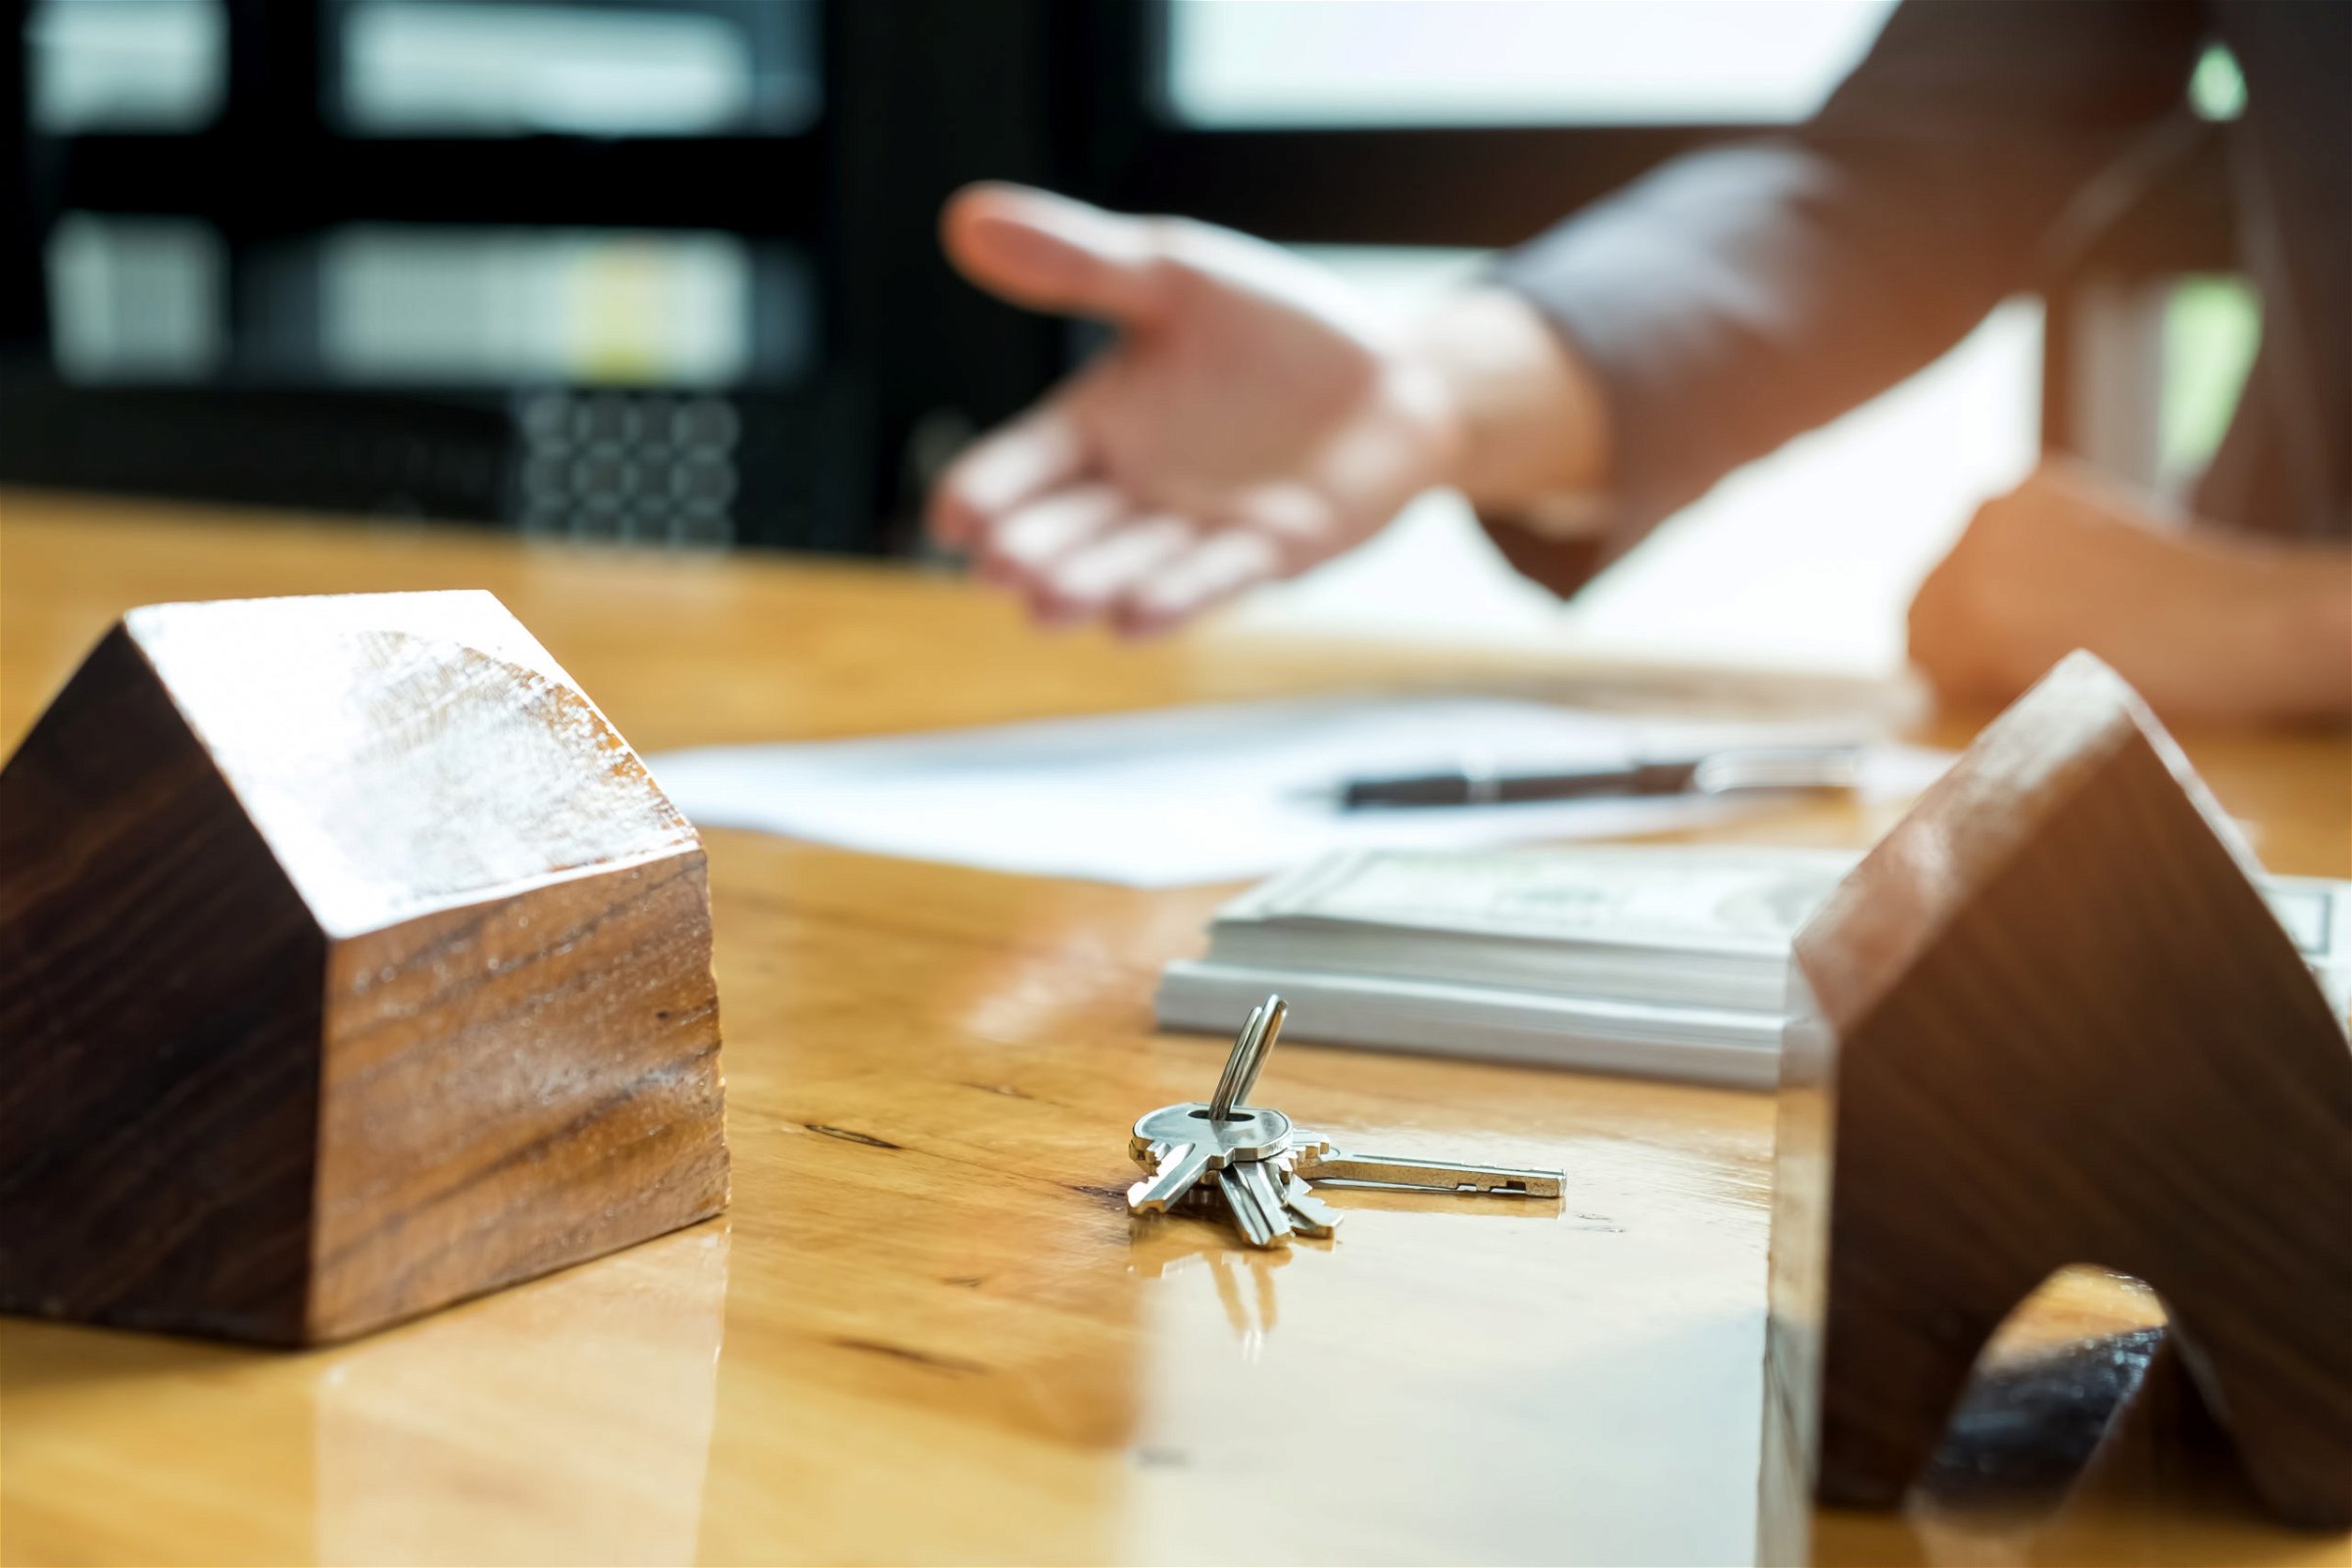 One of the significant property items in a divorce is the marital home. Selling the house can impact equitable distribution in the court's judgment for the dissolution of the marriage. It can also affect the agreement in a divorce settlement.